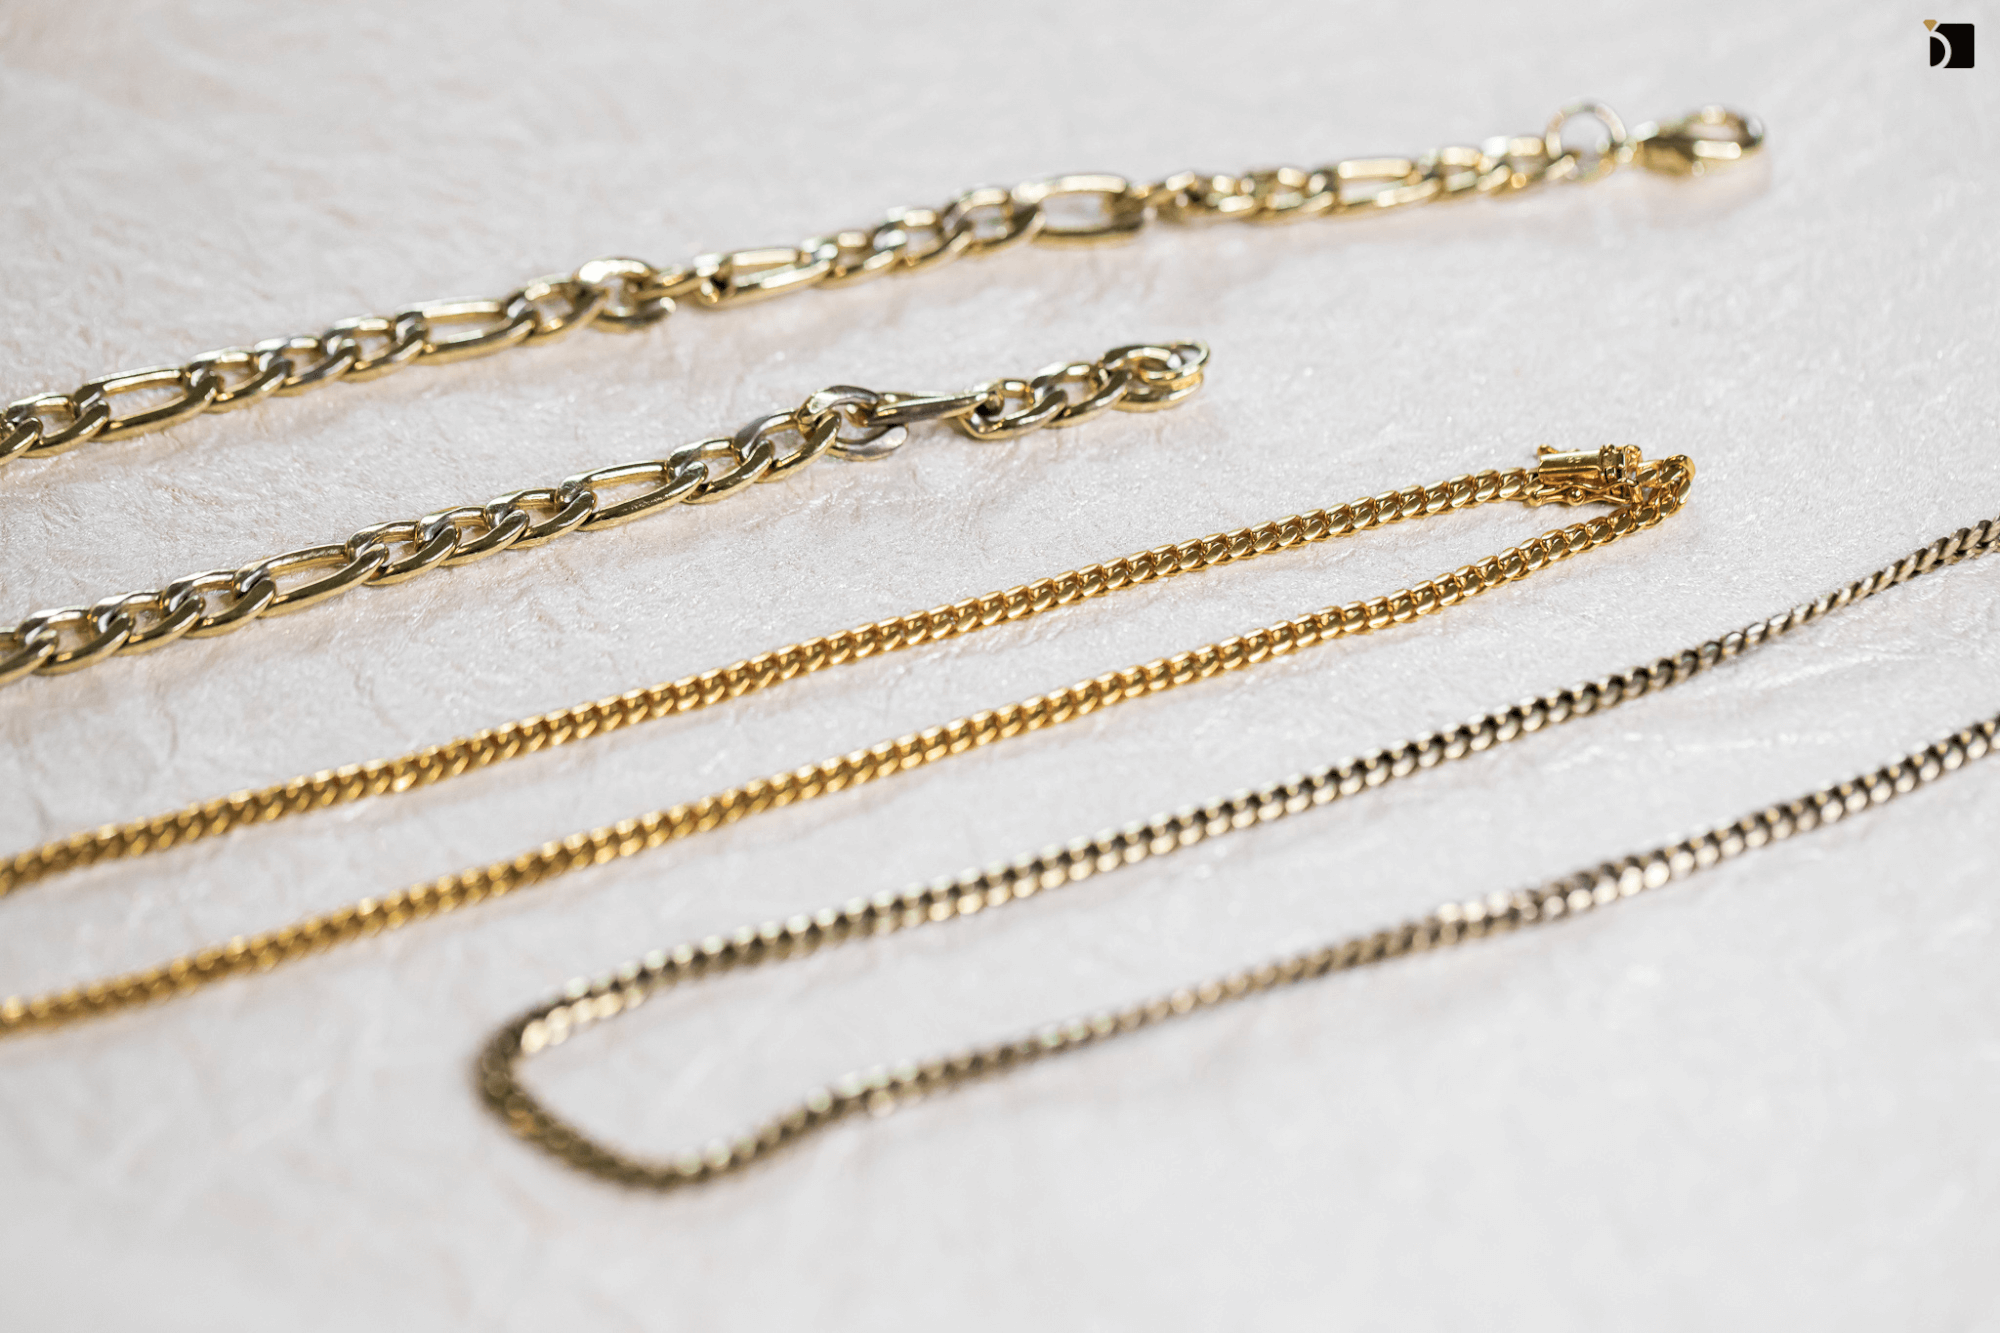 Image Showing the Different styles of Necklace Chain Jewelry: Repair Options.